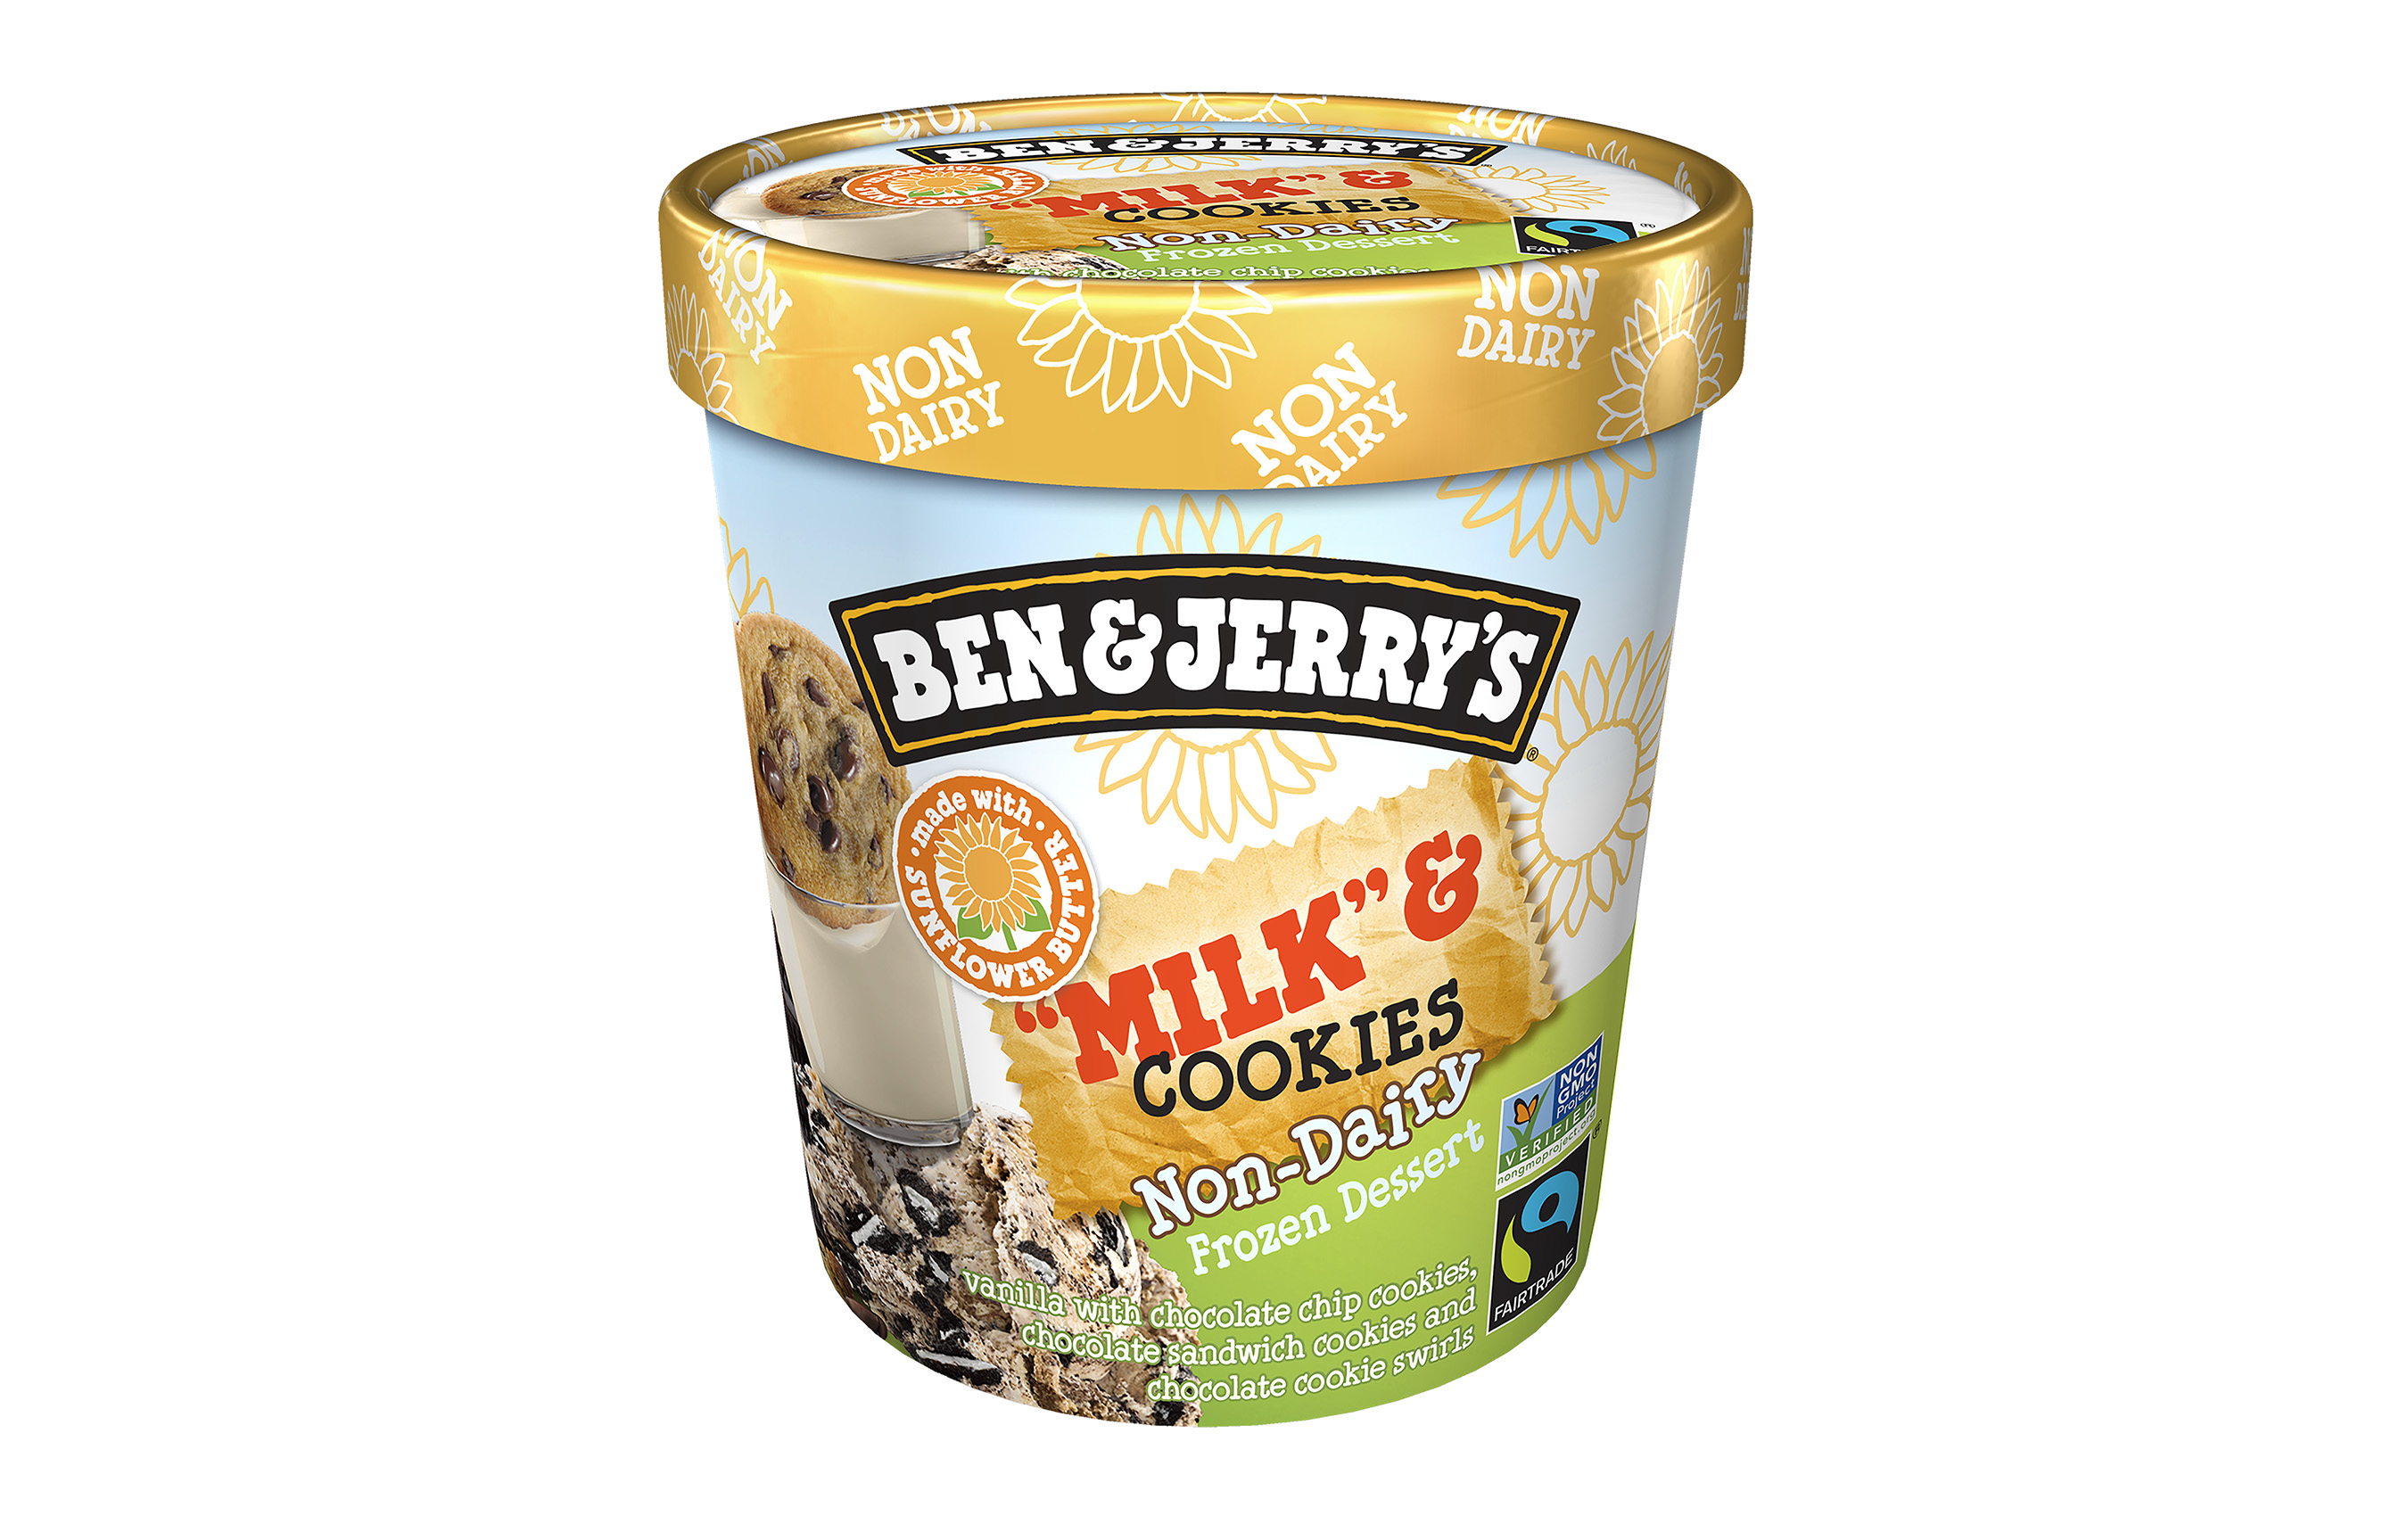 Ben & Jerry’s launches sunflower butter based “Milk” & Cookies, a vanilla non-dairy frozen dessert with chocolate chip cookies, chocolate sandwich cookies and chocolate cookie swirls.